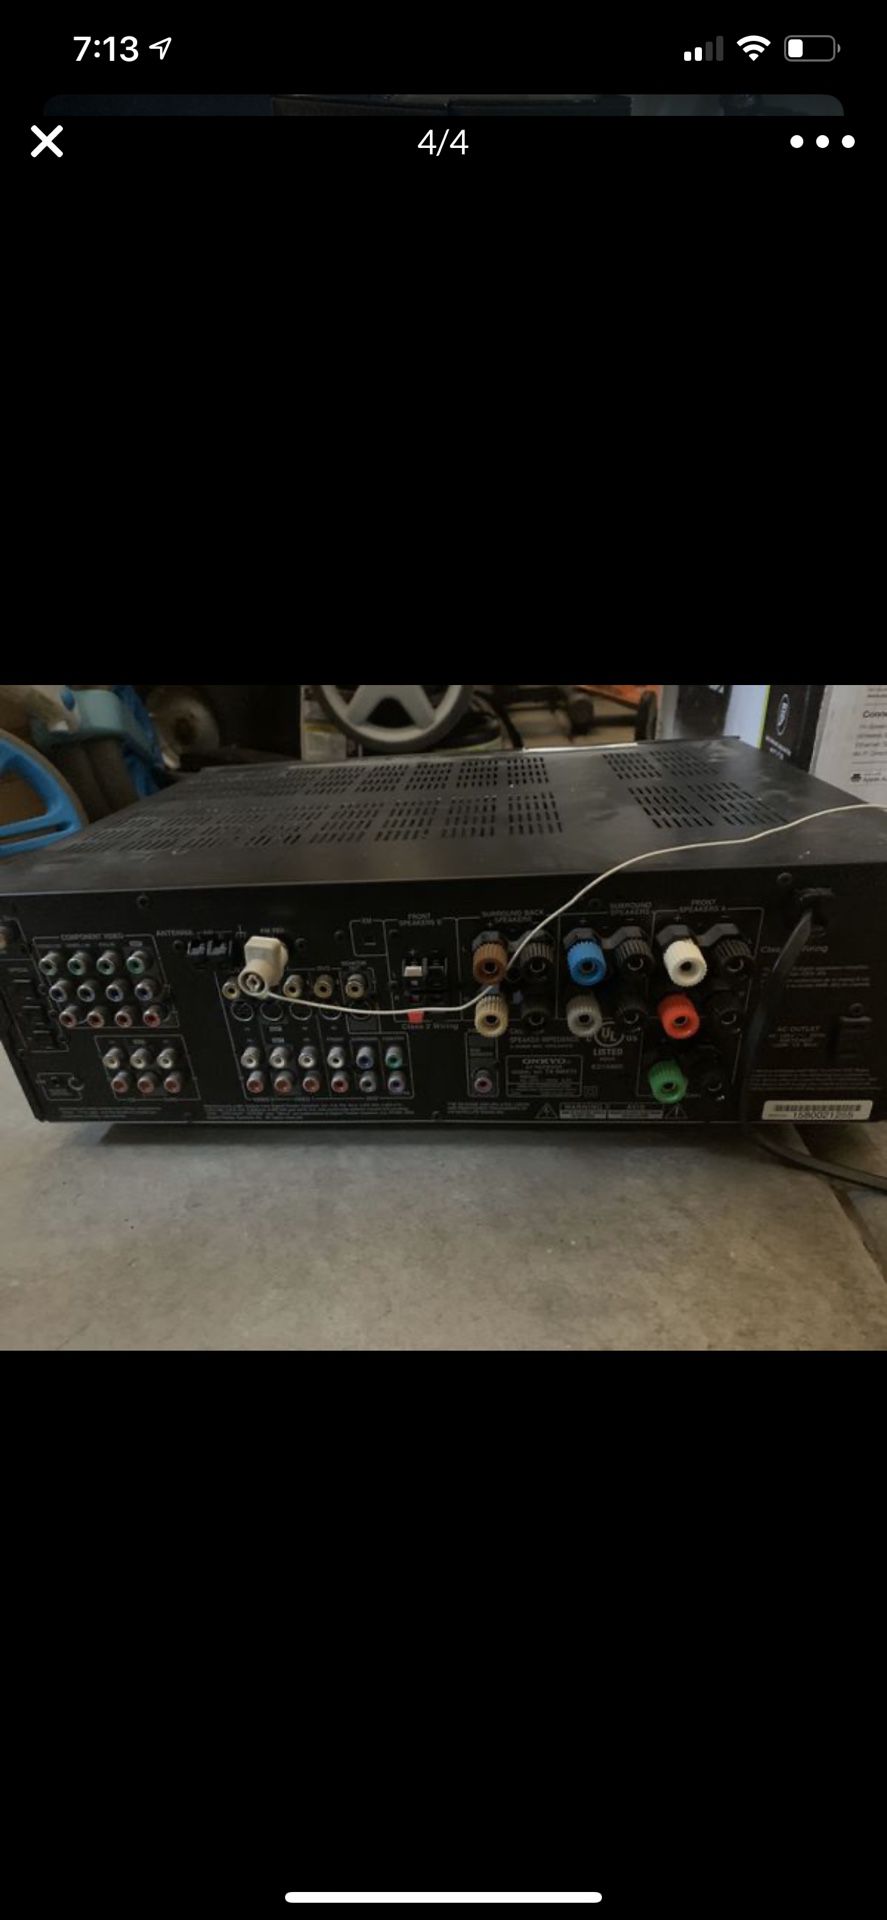 Onkyo 7.1 channel receiver and 5.1 onkyo home theater speakers (1 center, 4 surround, 1 subwoofer) does NOT have remote but can find on eBay for $20